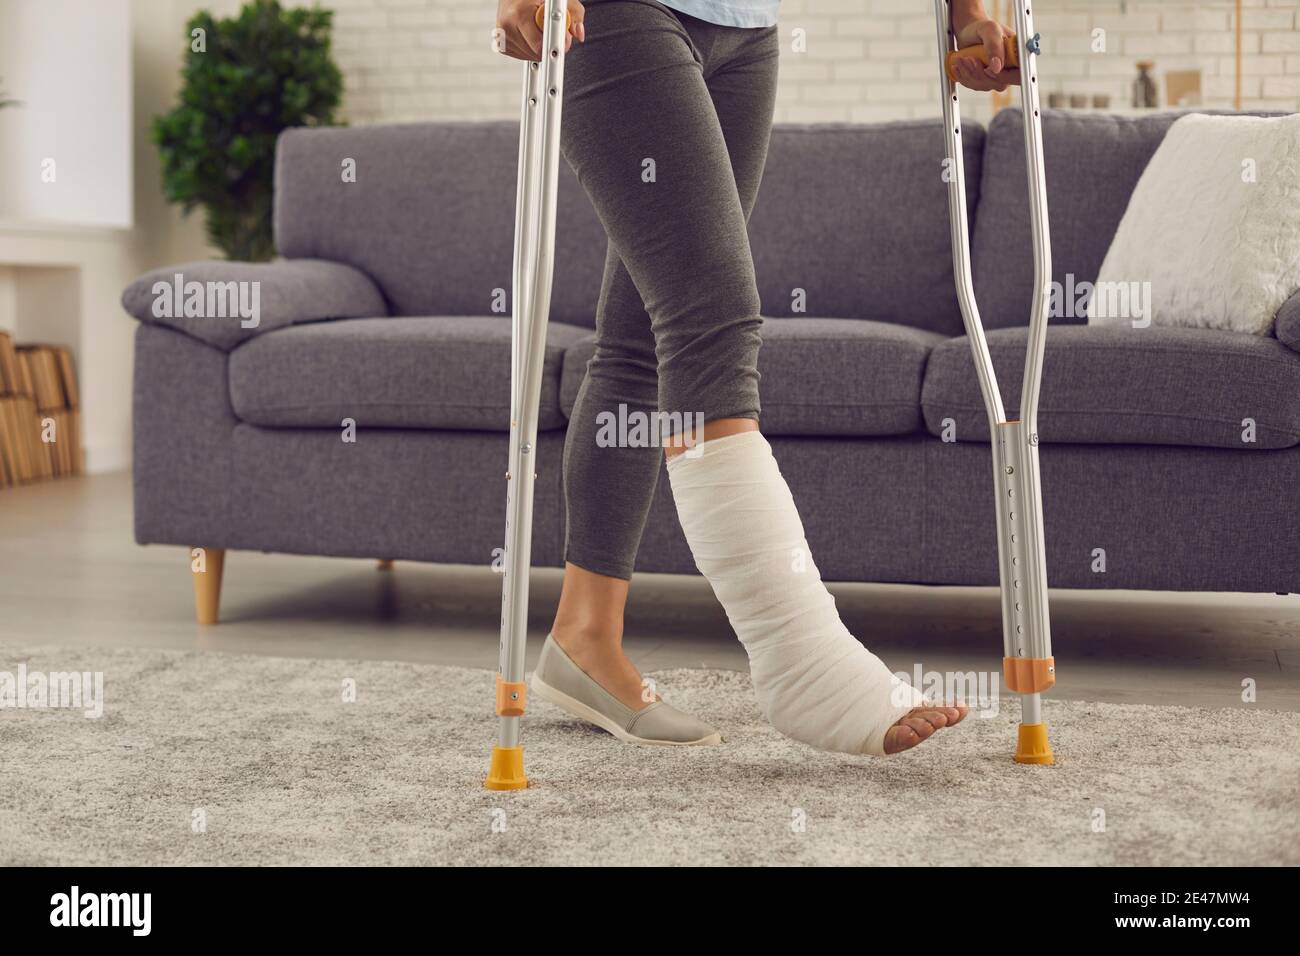 Patient with broken leg in plaster cast undergoes rehabilitation and walks with crutches Stock Photo